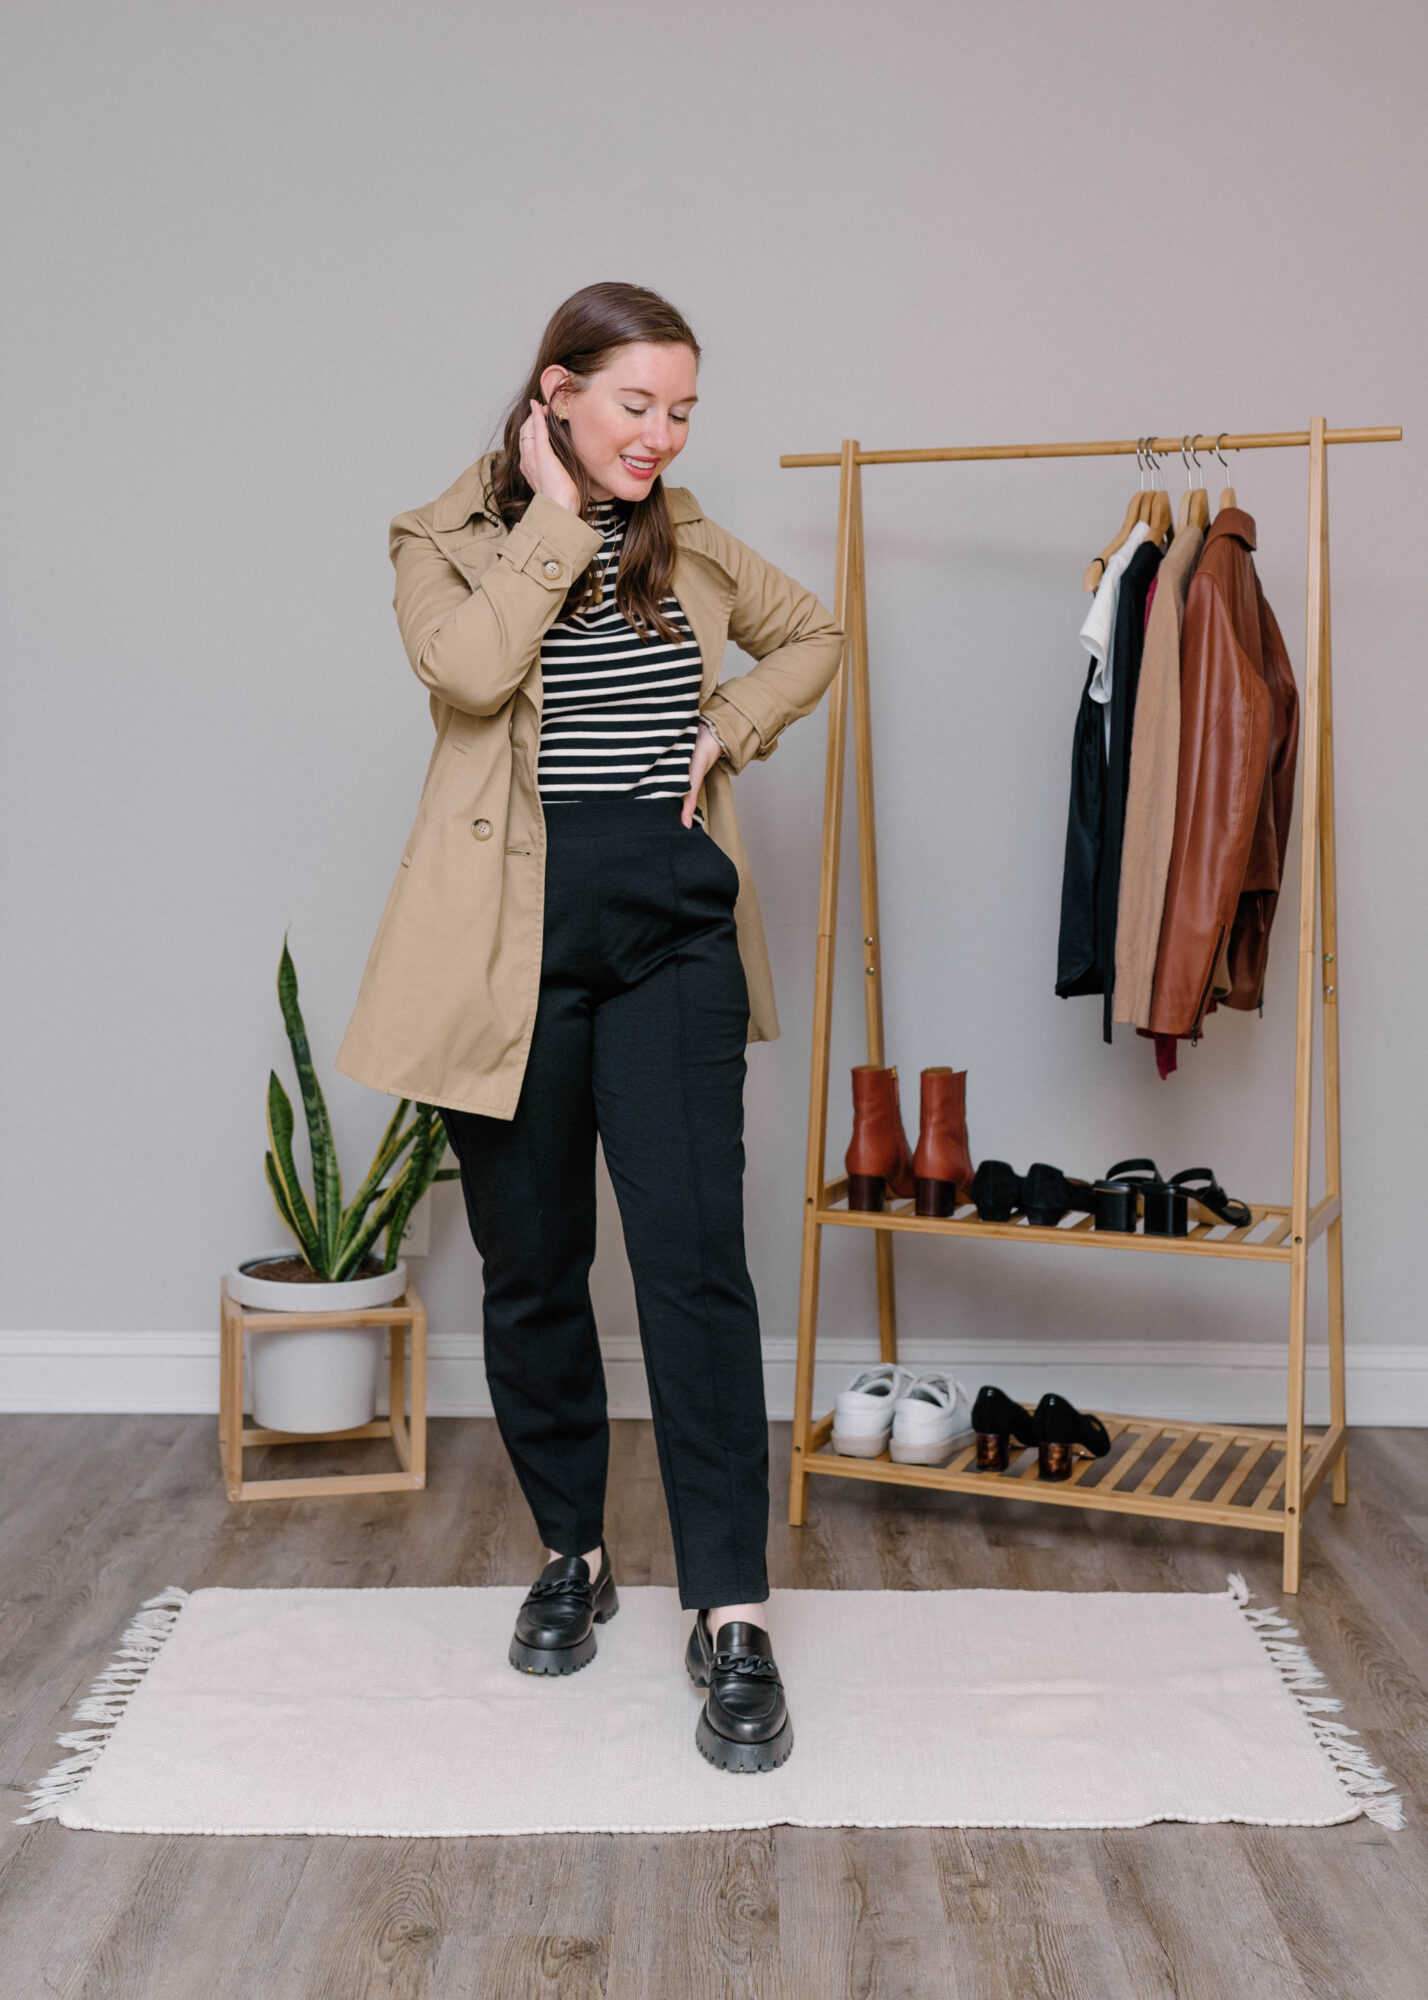 Alyssa wears the wool& Rosso pants with a striped shirt and a trench